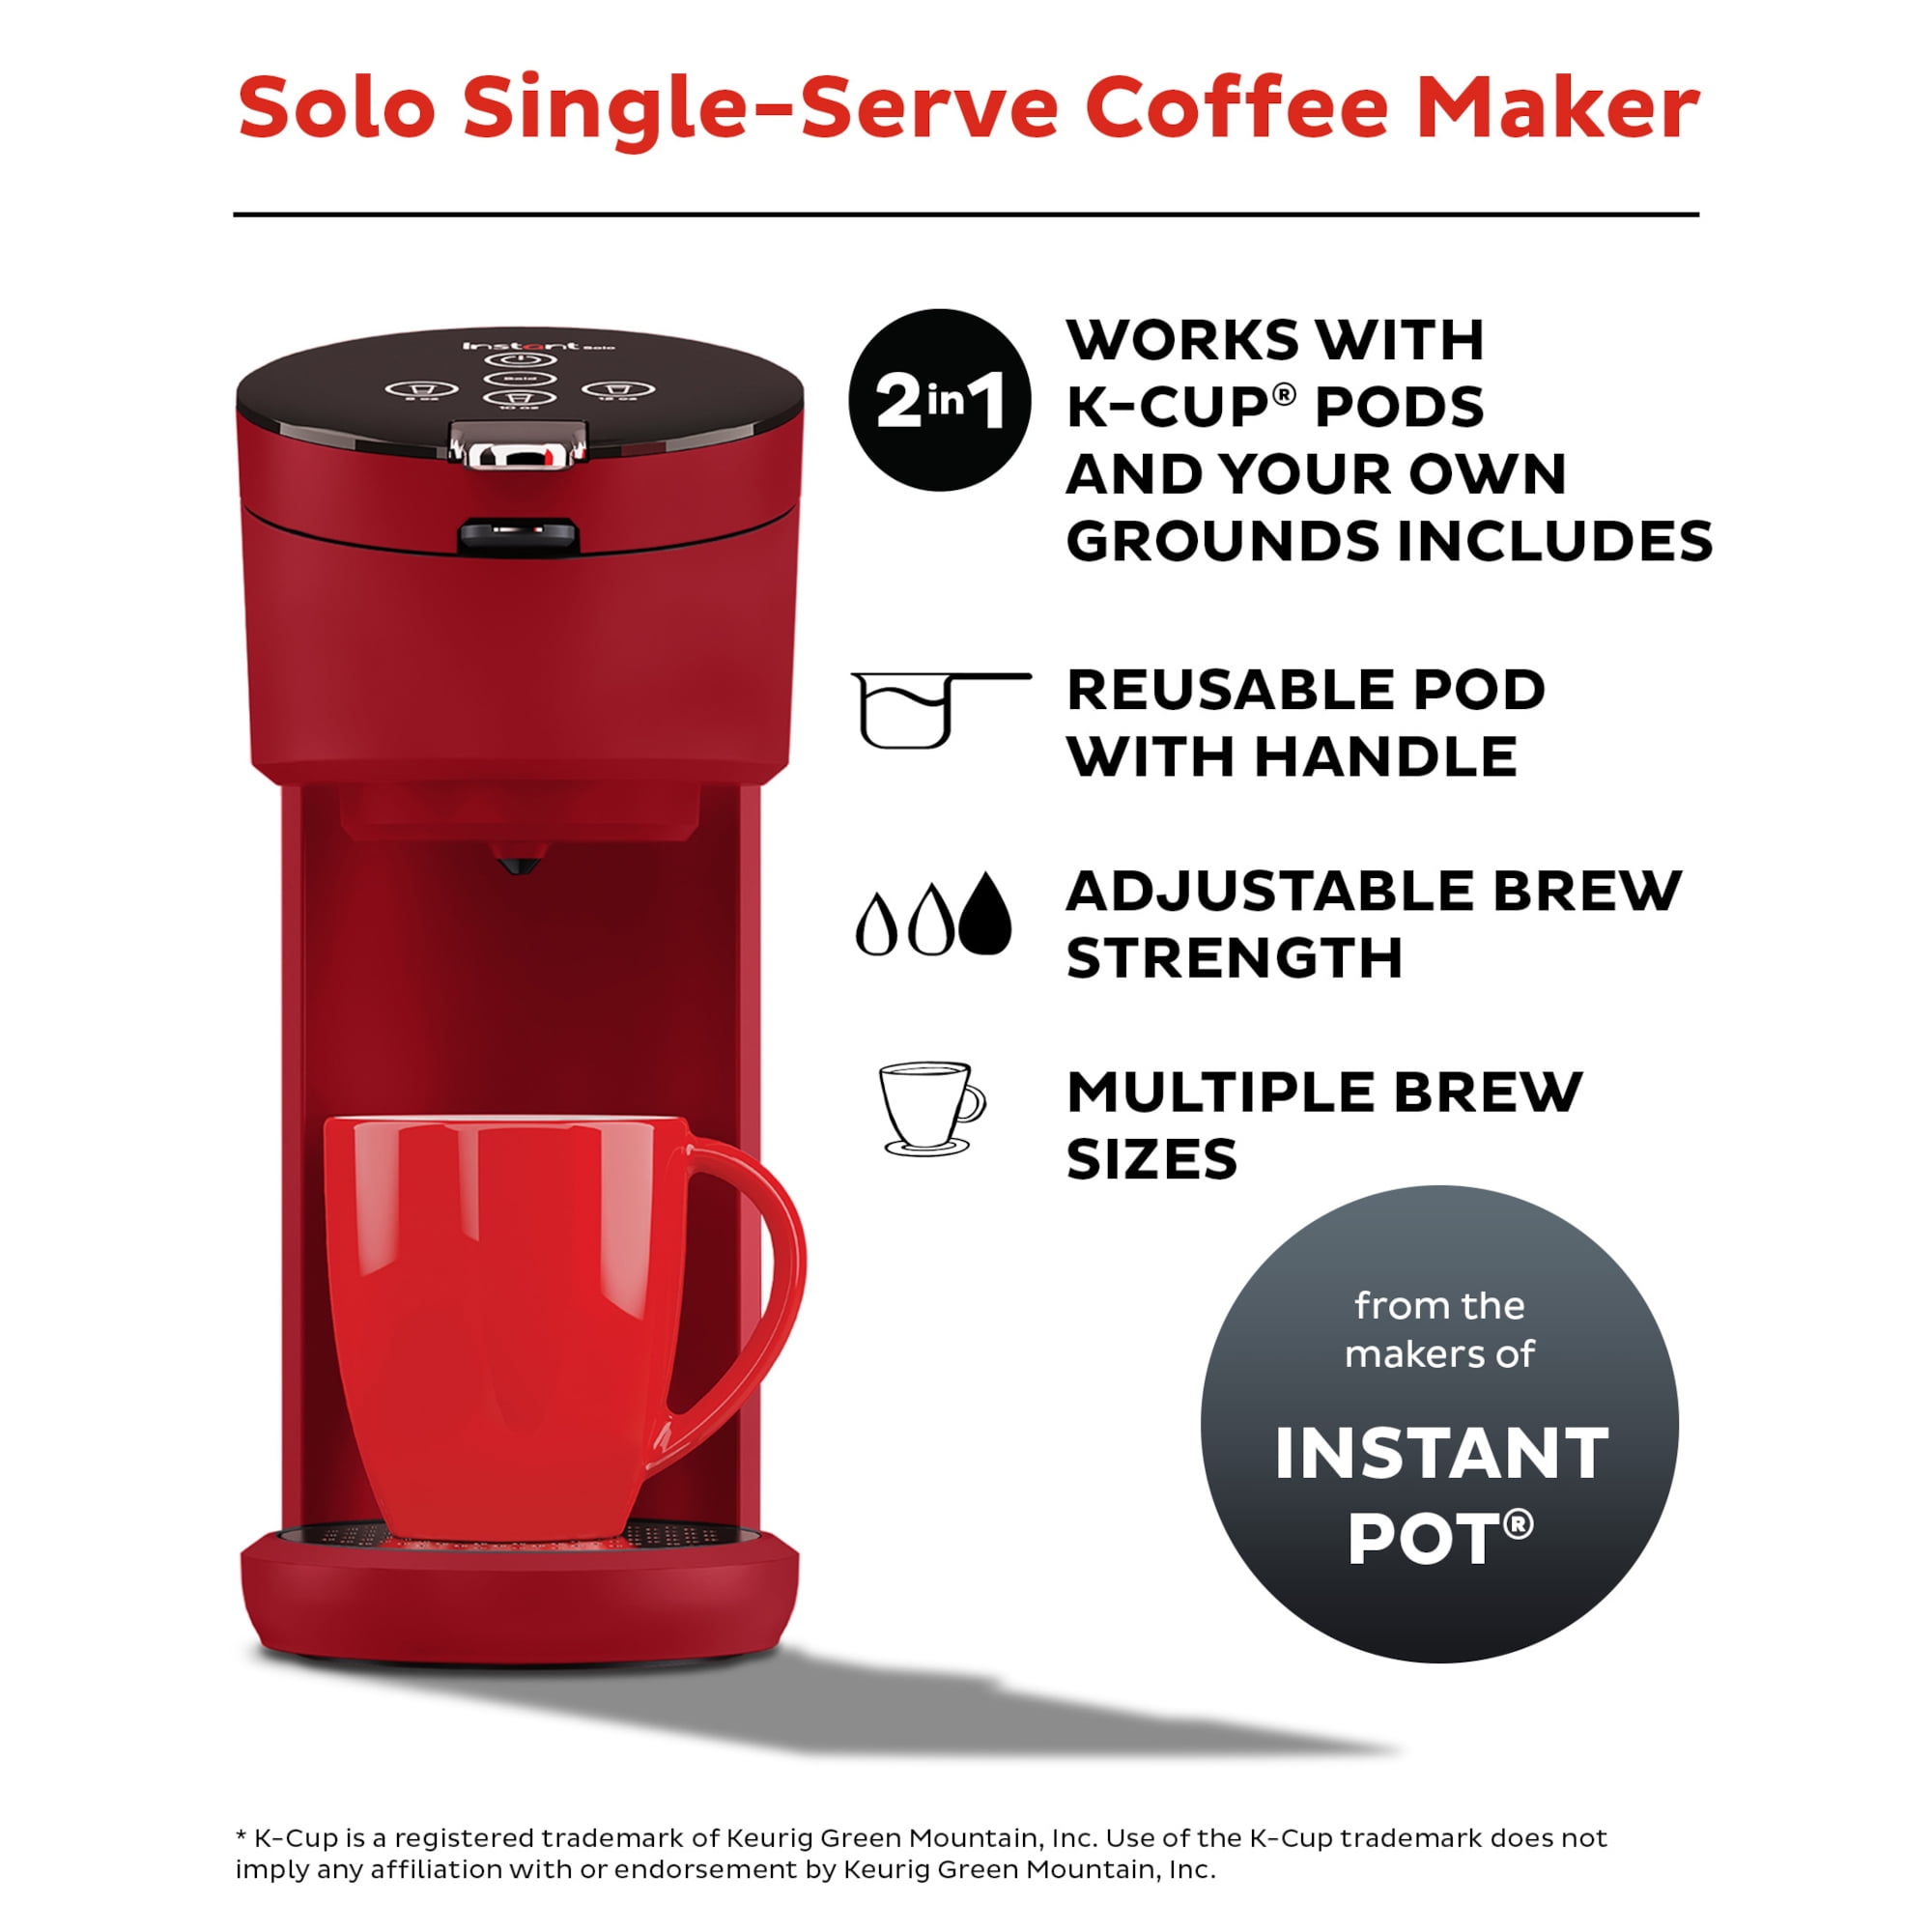 New Instant Pot - Solo Single-Serve Coffee Maker, Works with K-Cup